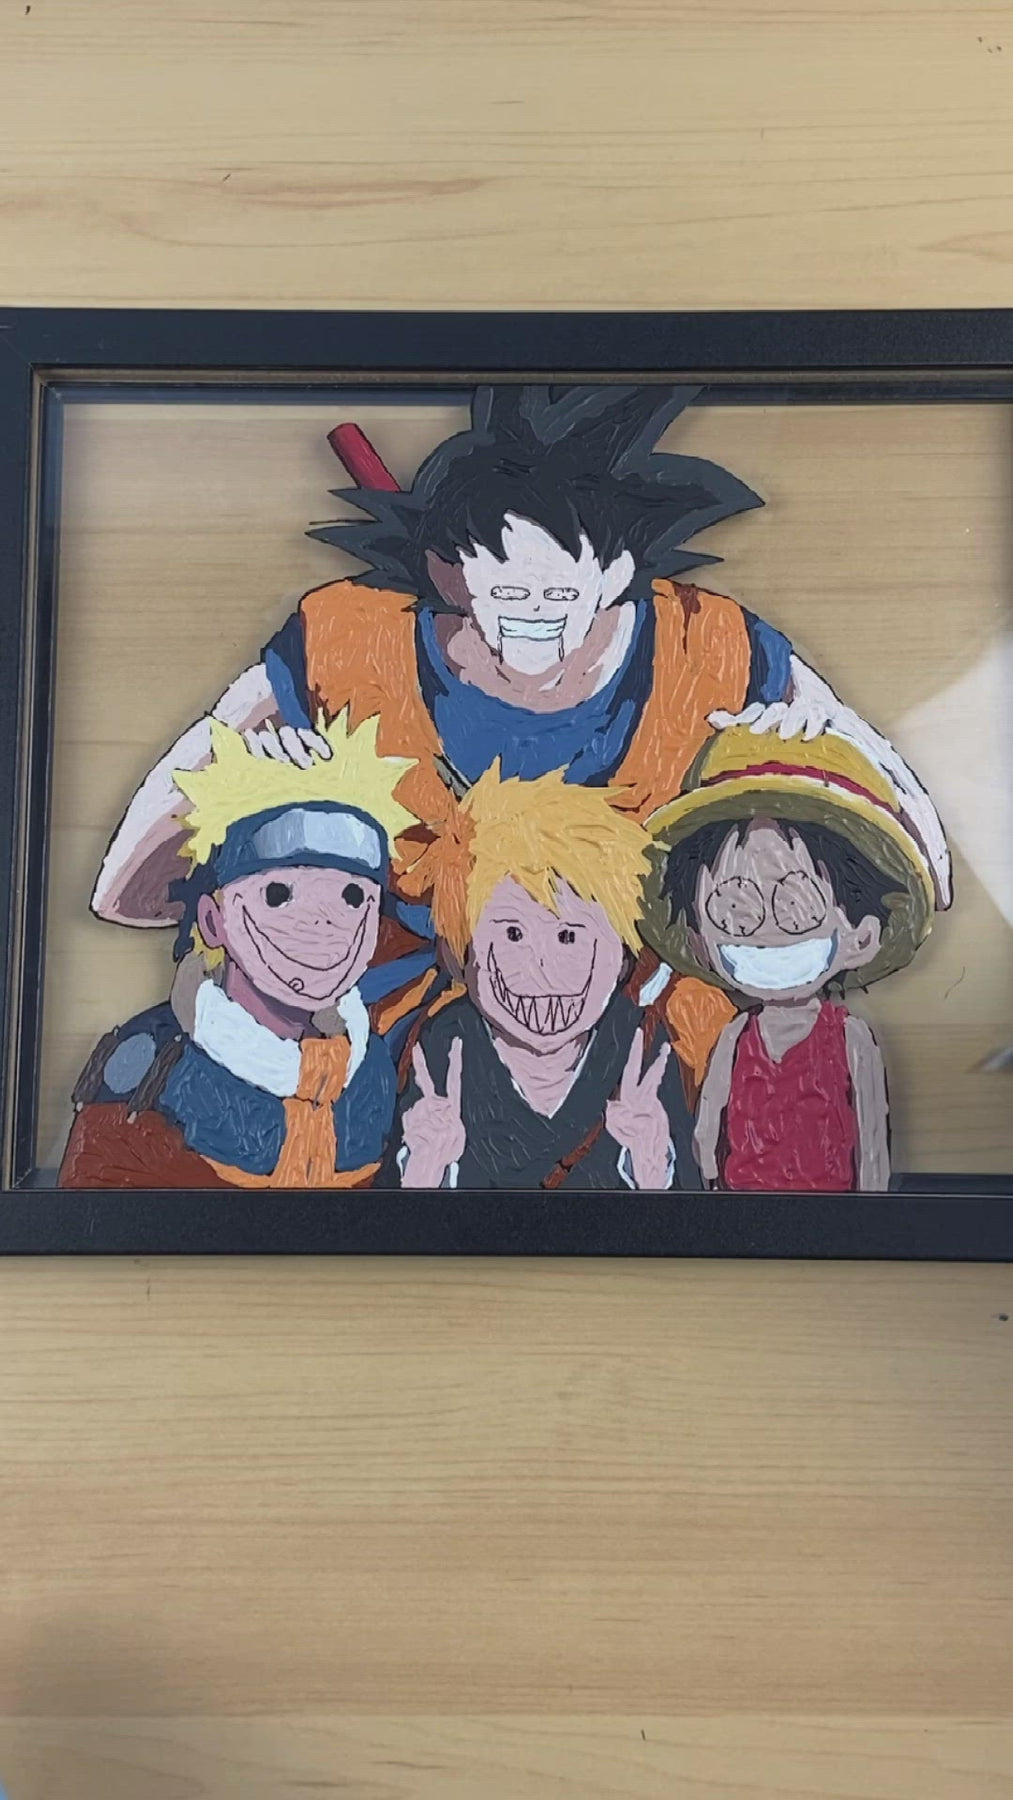 Anime Glass Painting for Sale in Nashville, TN - OfferUp